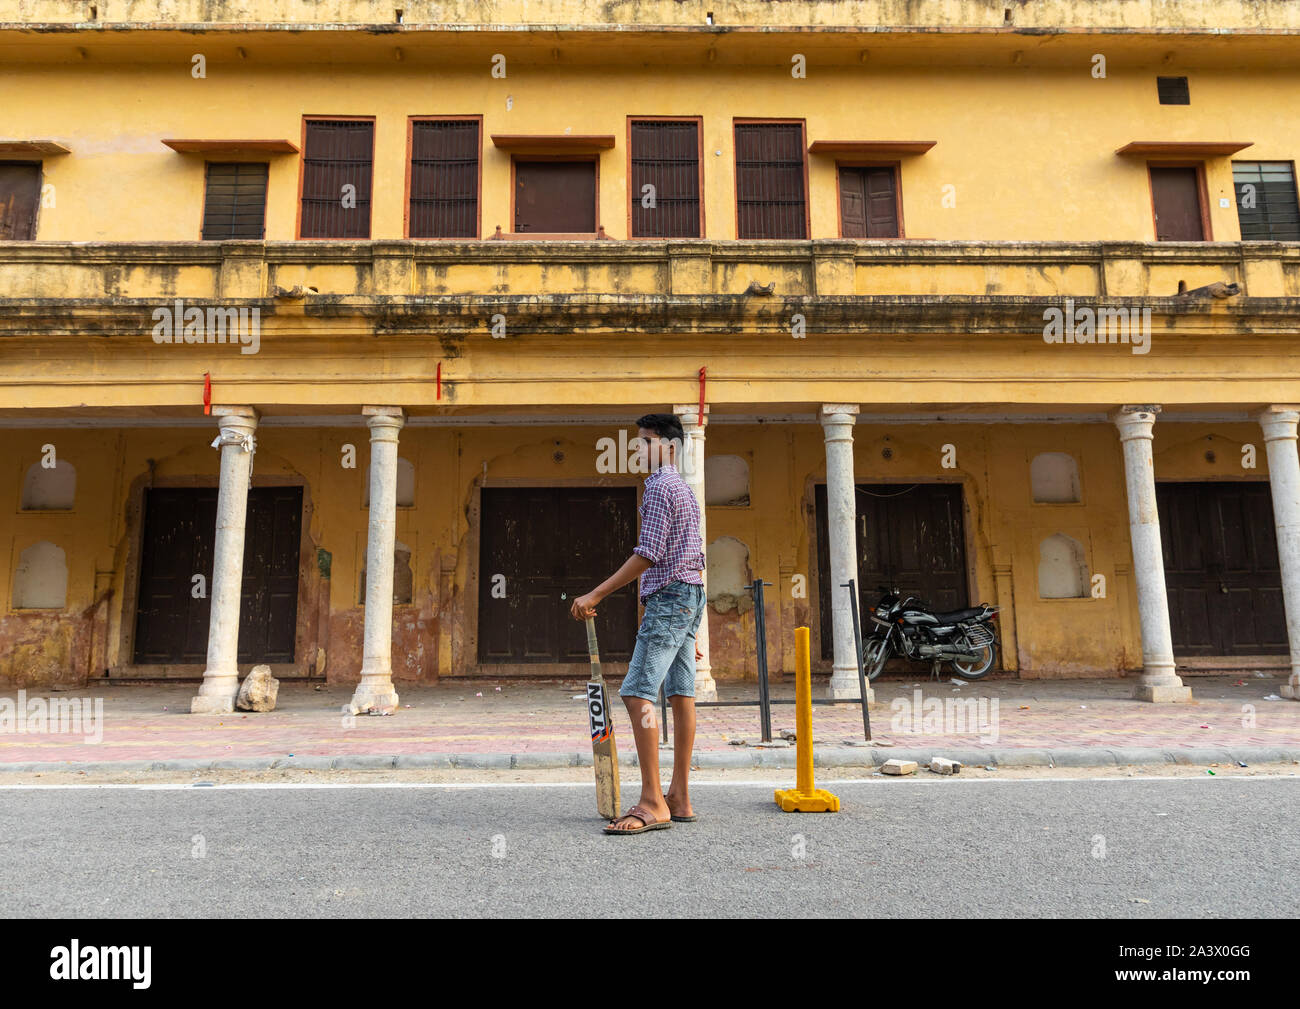 Young boy holding a cricket bat and playing in the street, Rajasthan, Jaipur, India Stock Photo